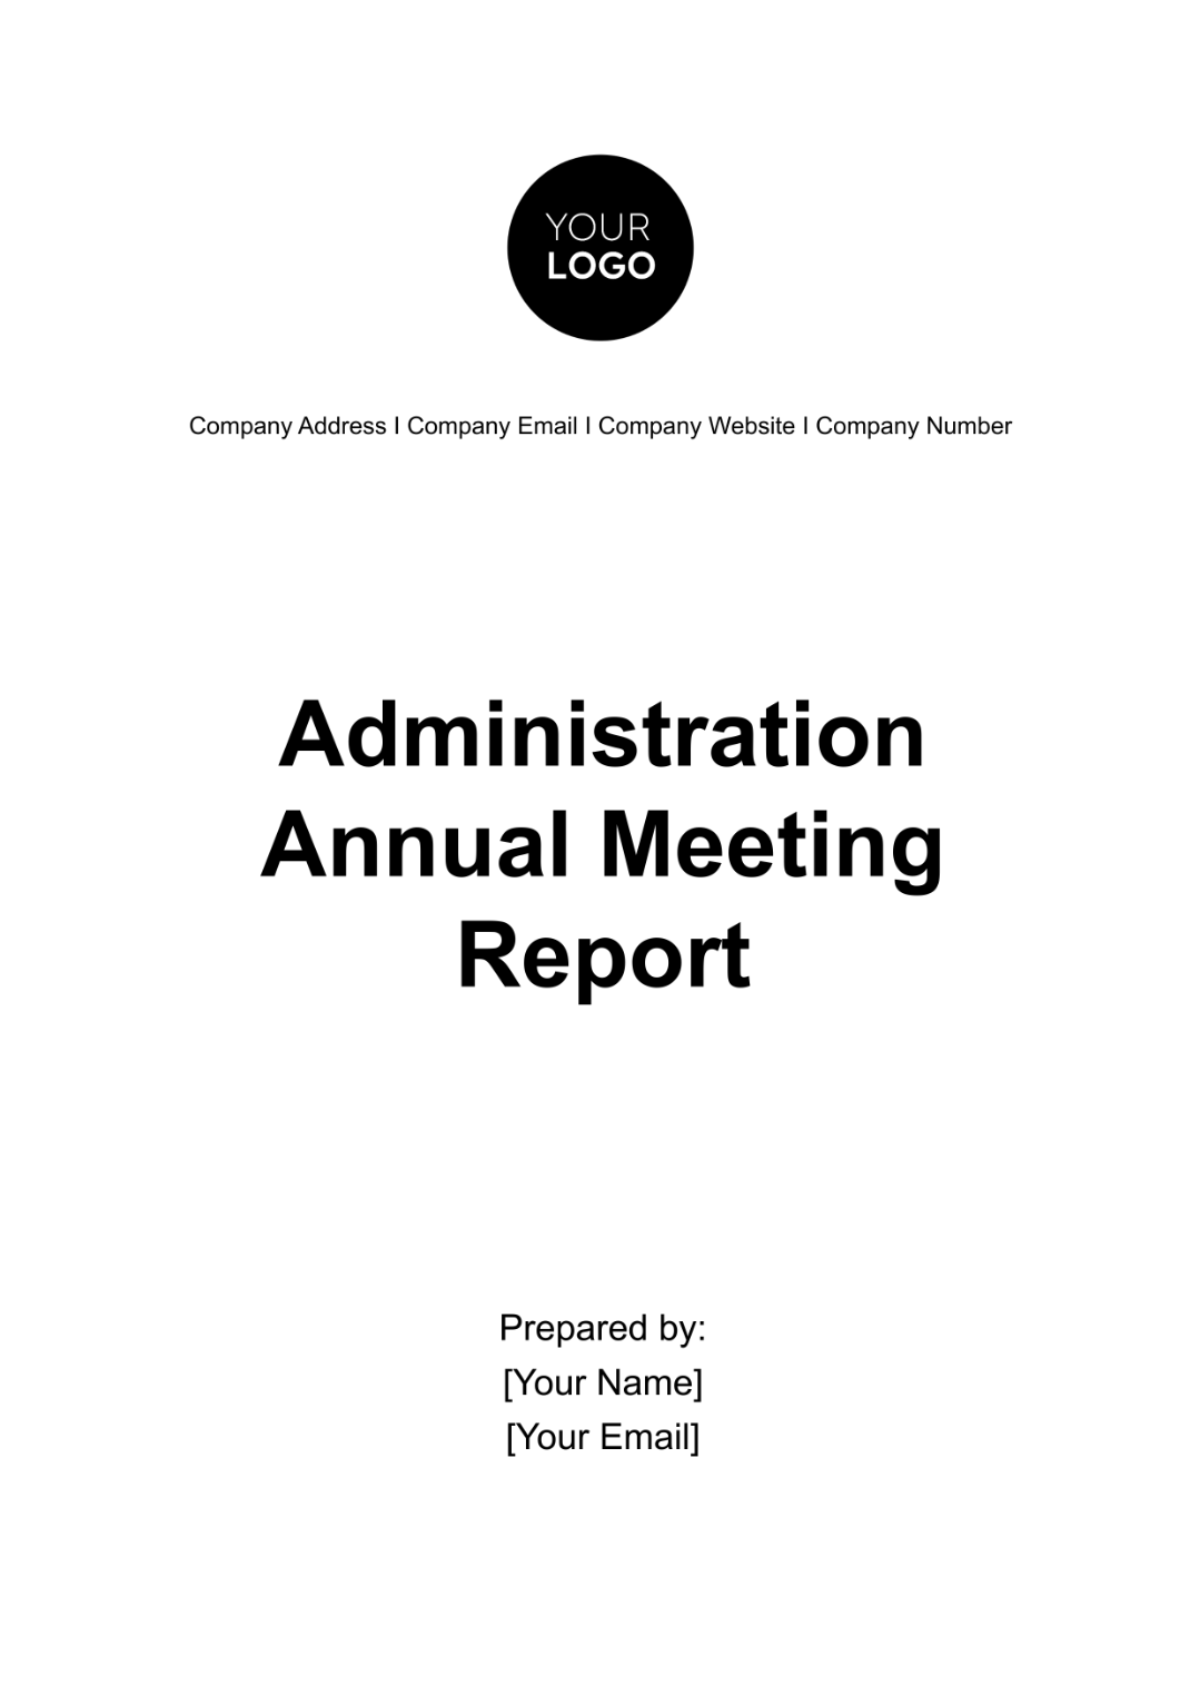 Administration Annual Meeting Report Template